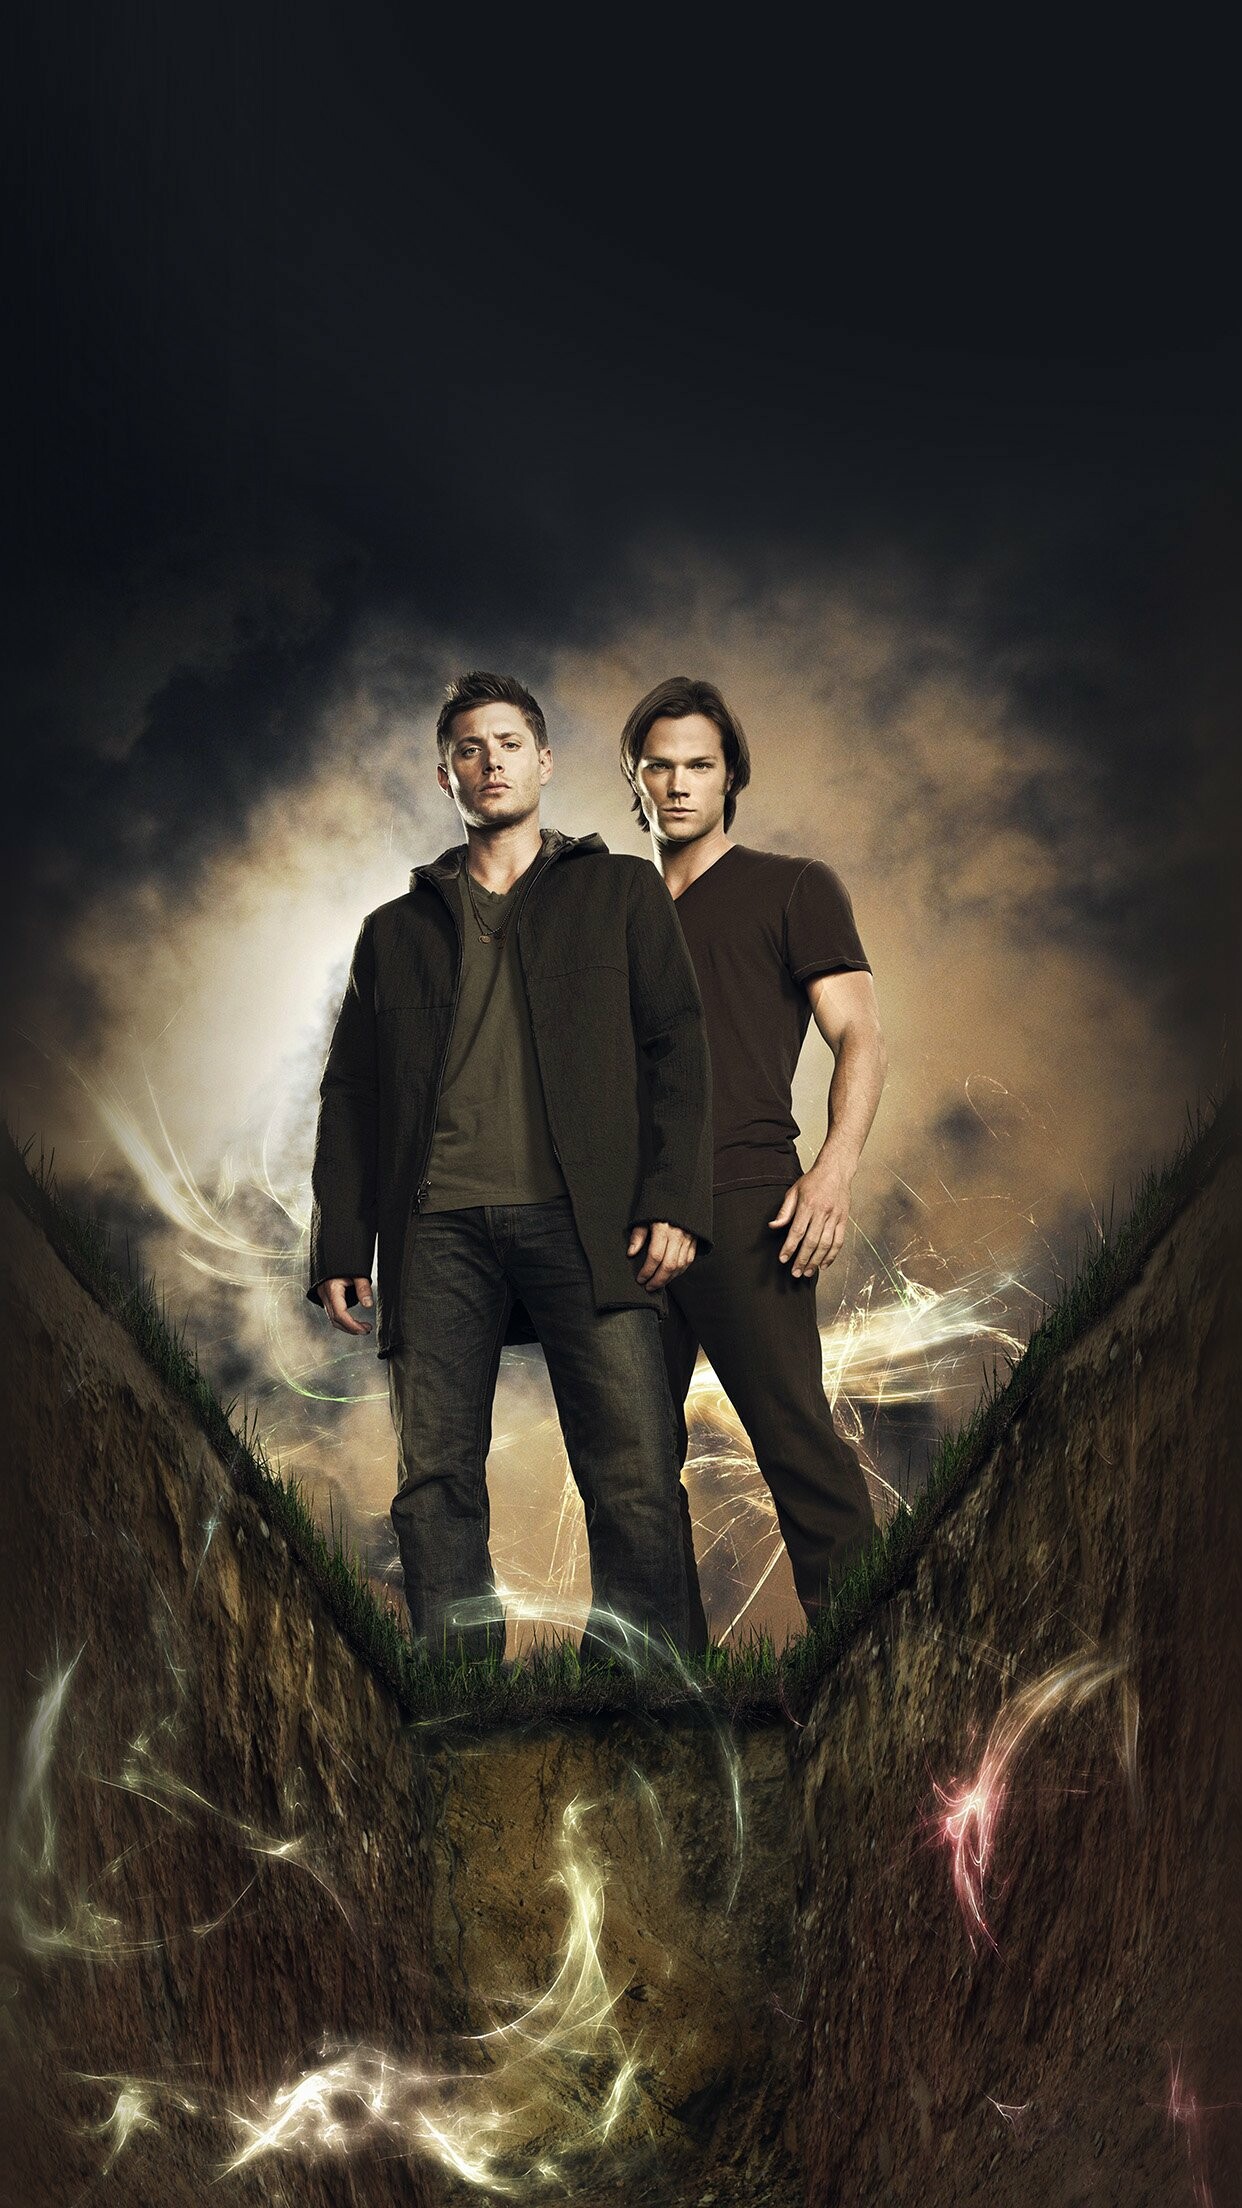 Supernatural: Sam and Dean Winchester, who travel across America in a black 1967 Chevy Impala investigating and combating paranormal events and other unexplained occurrences. 1250x2210 HD Background.